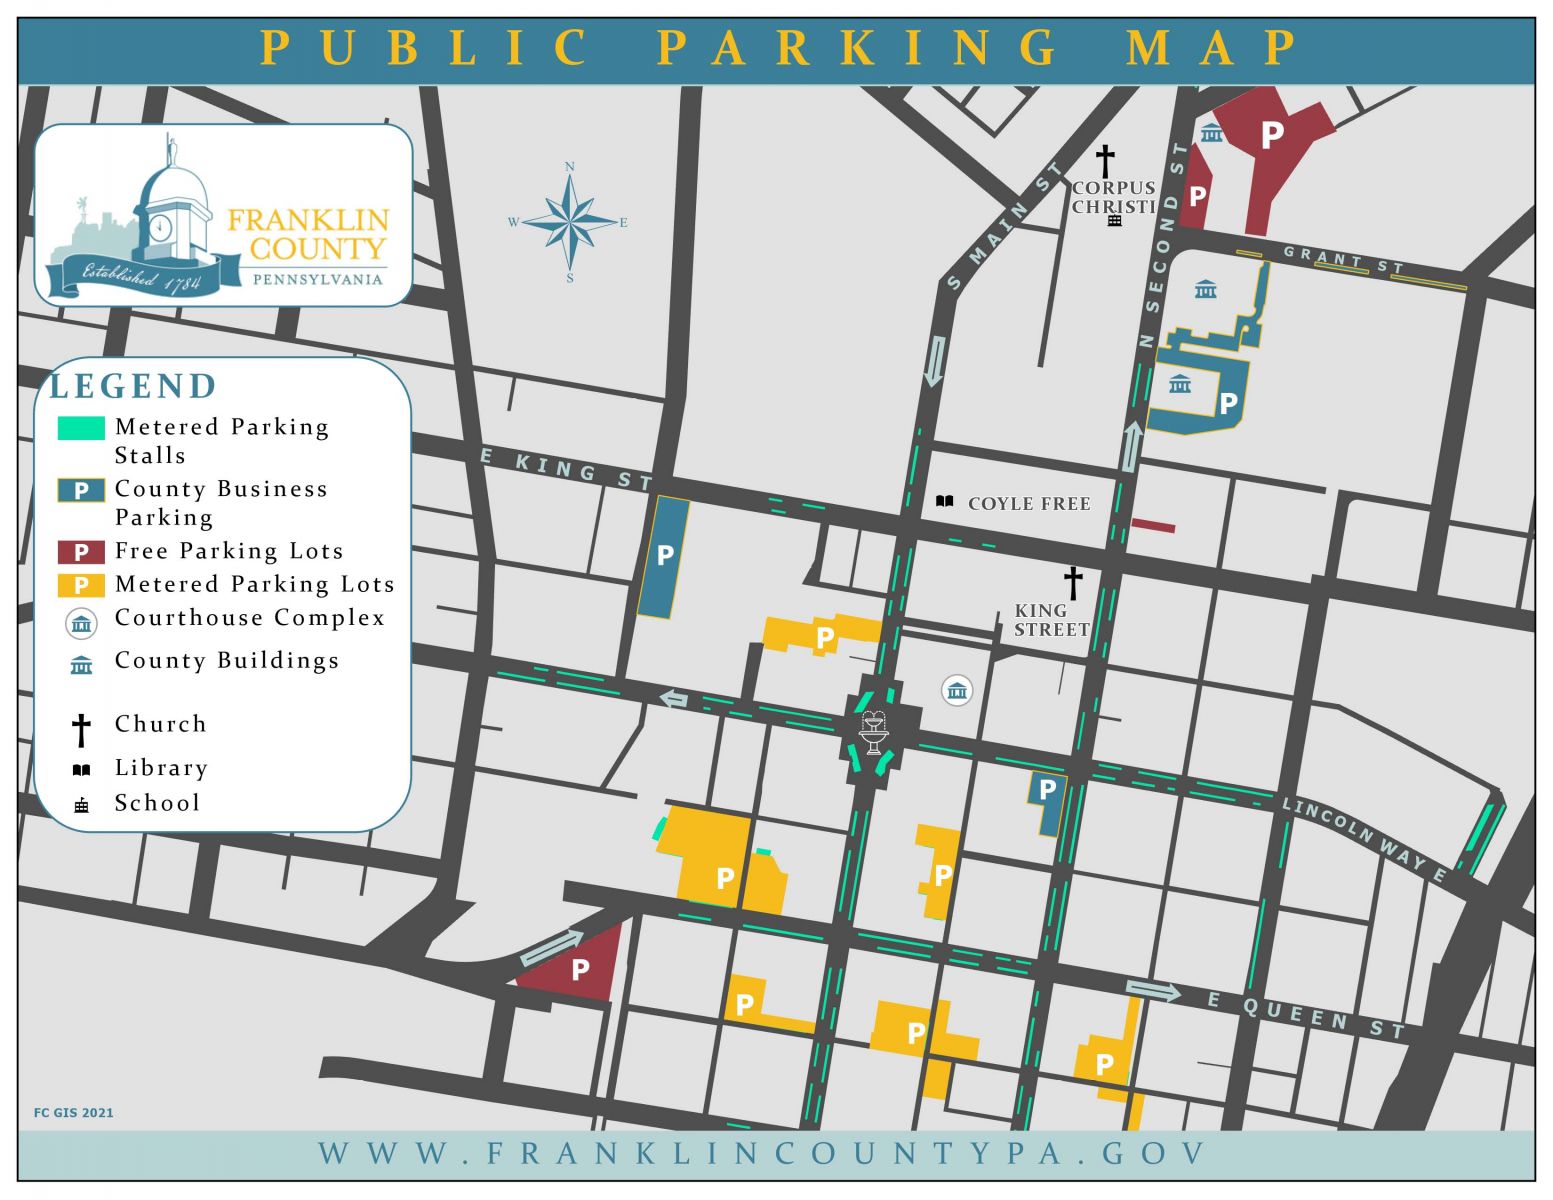 Public parking map showing parking lots, roads, landmarks and courthouse